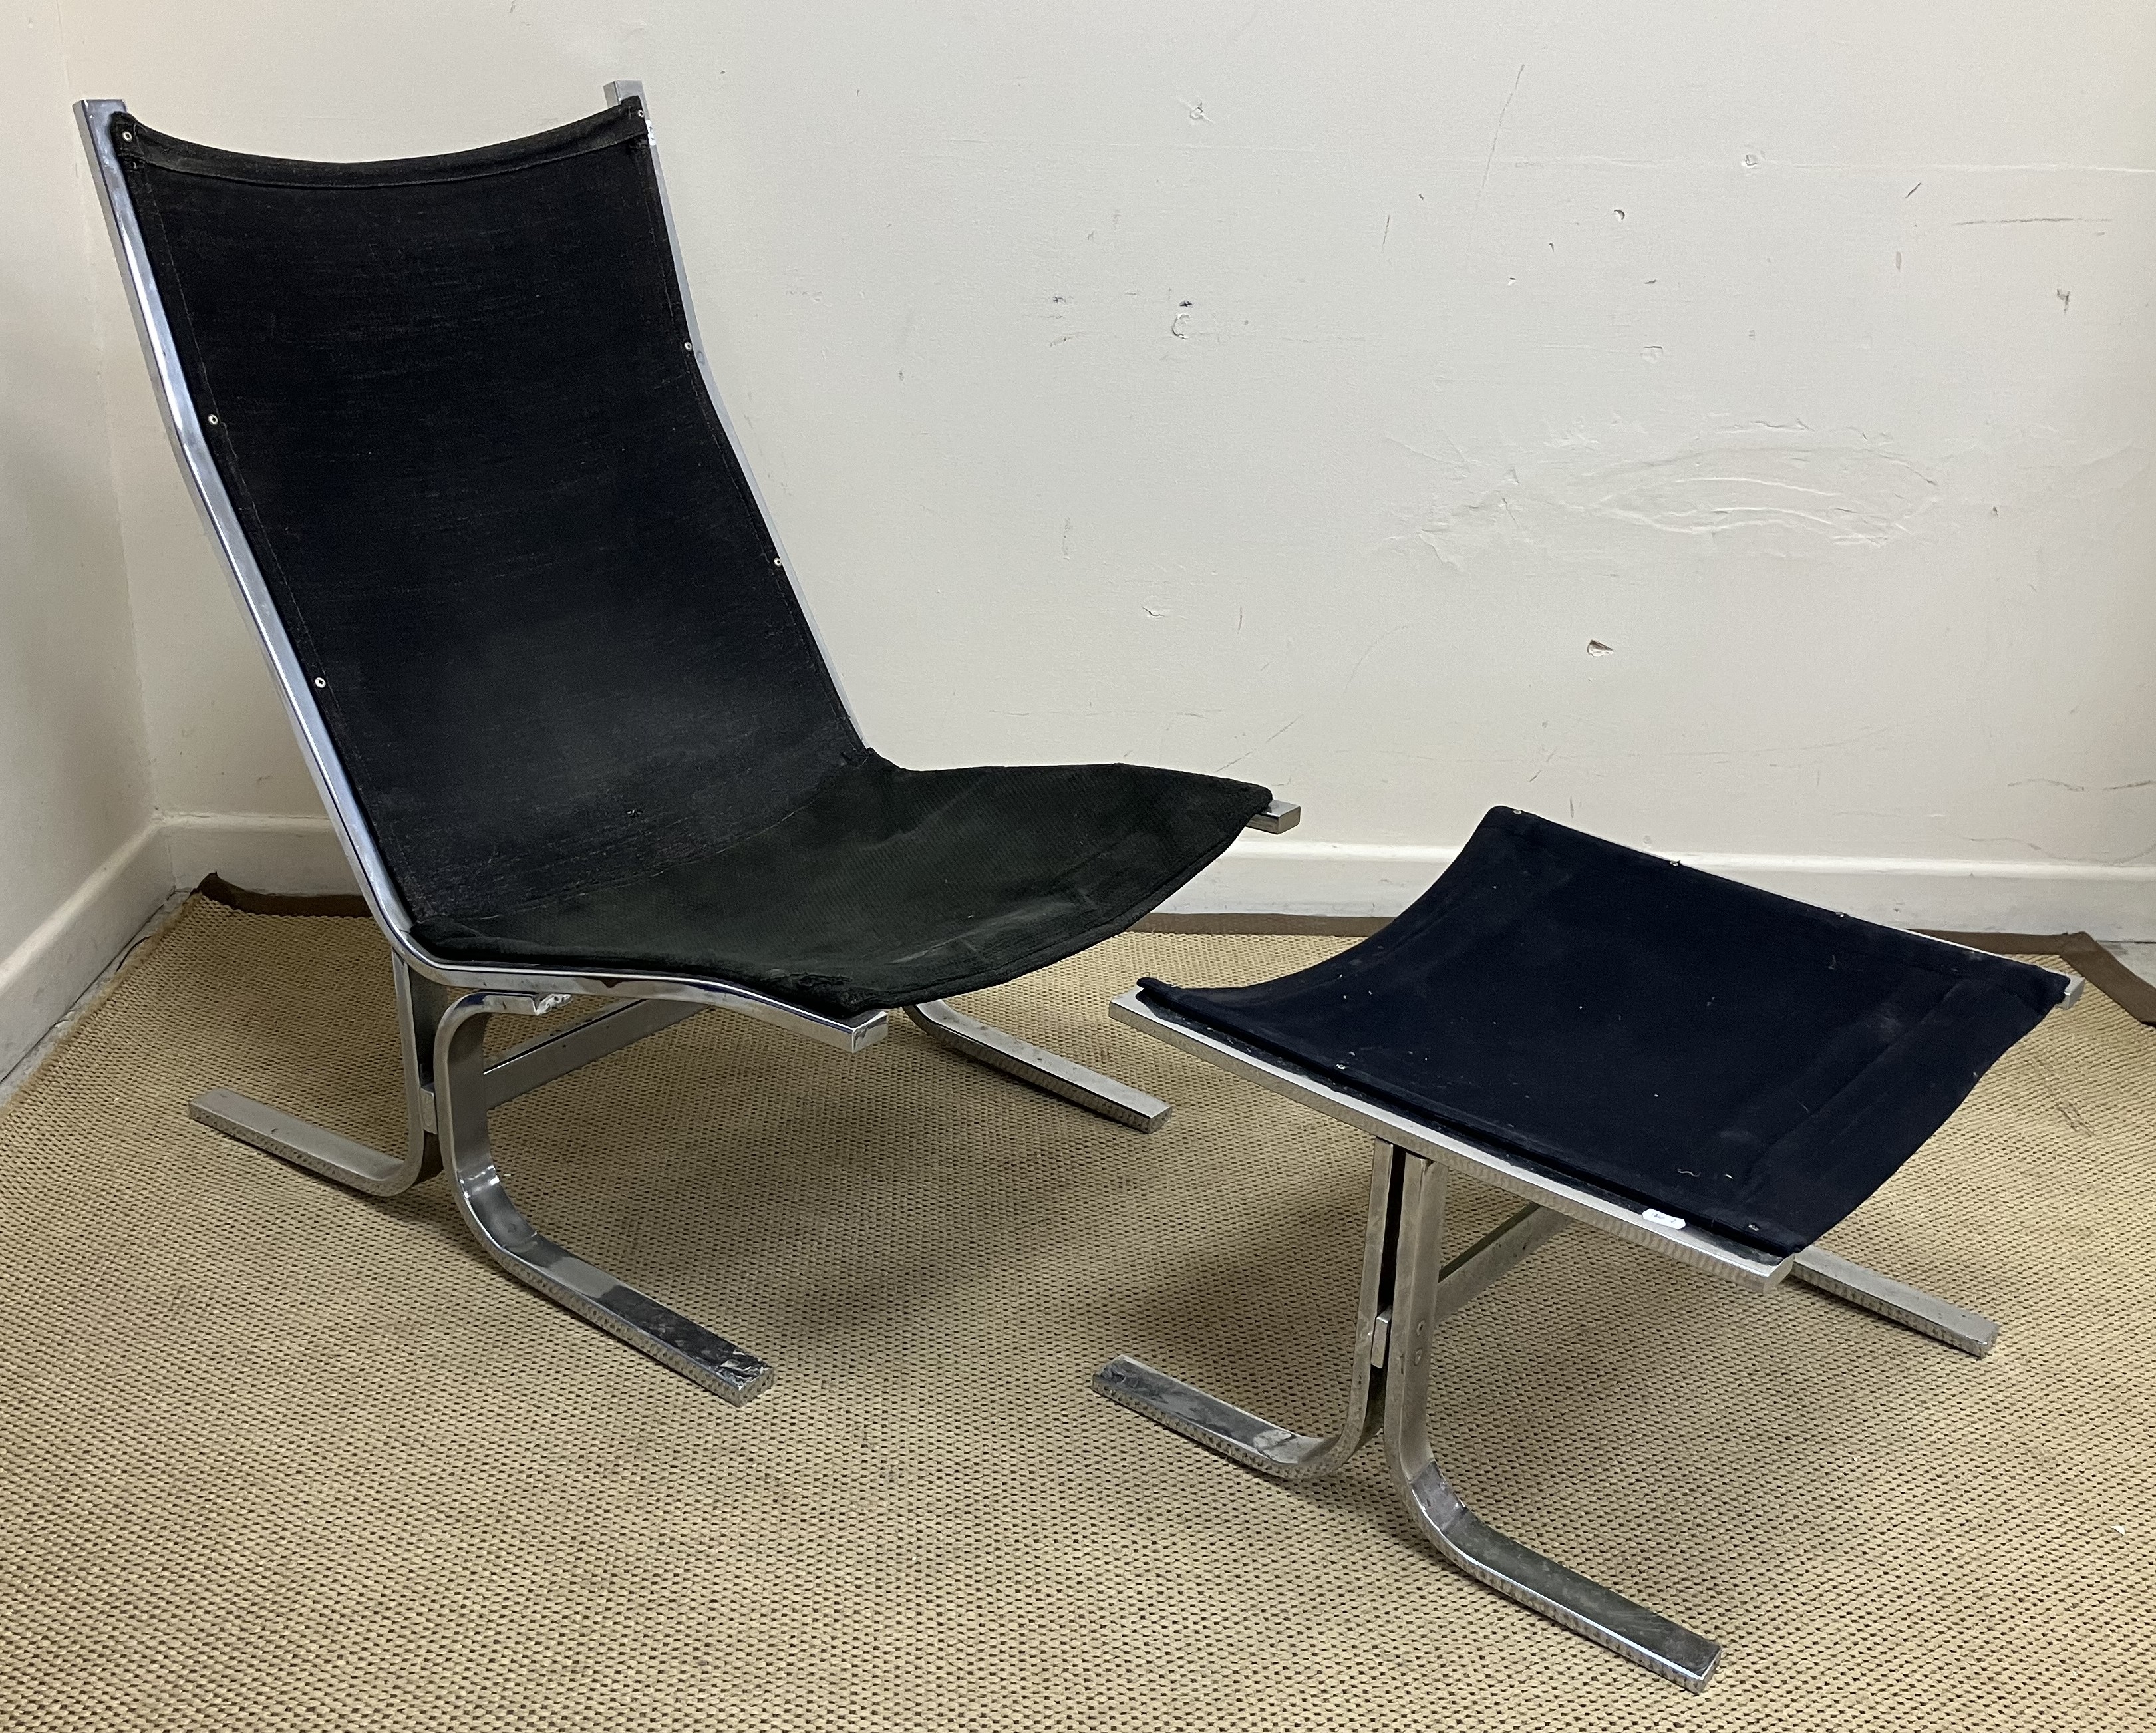 A 20th Century chrome framed chair with black canvas seat and back, 62.5 cm wide x 84 cm deep x 93.